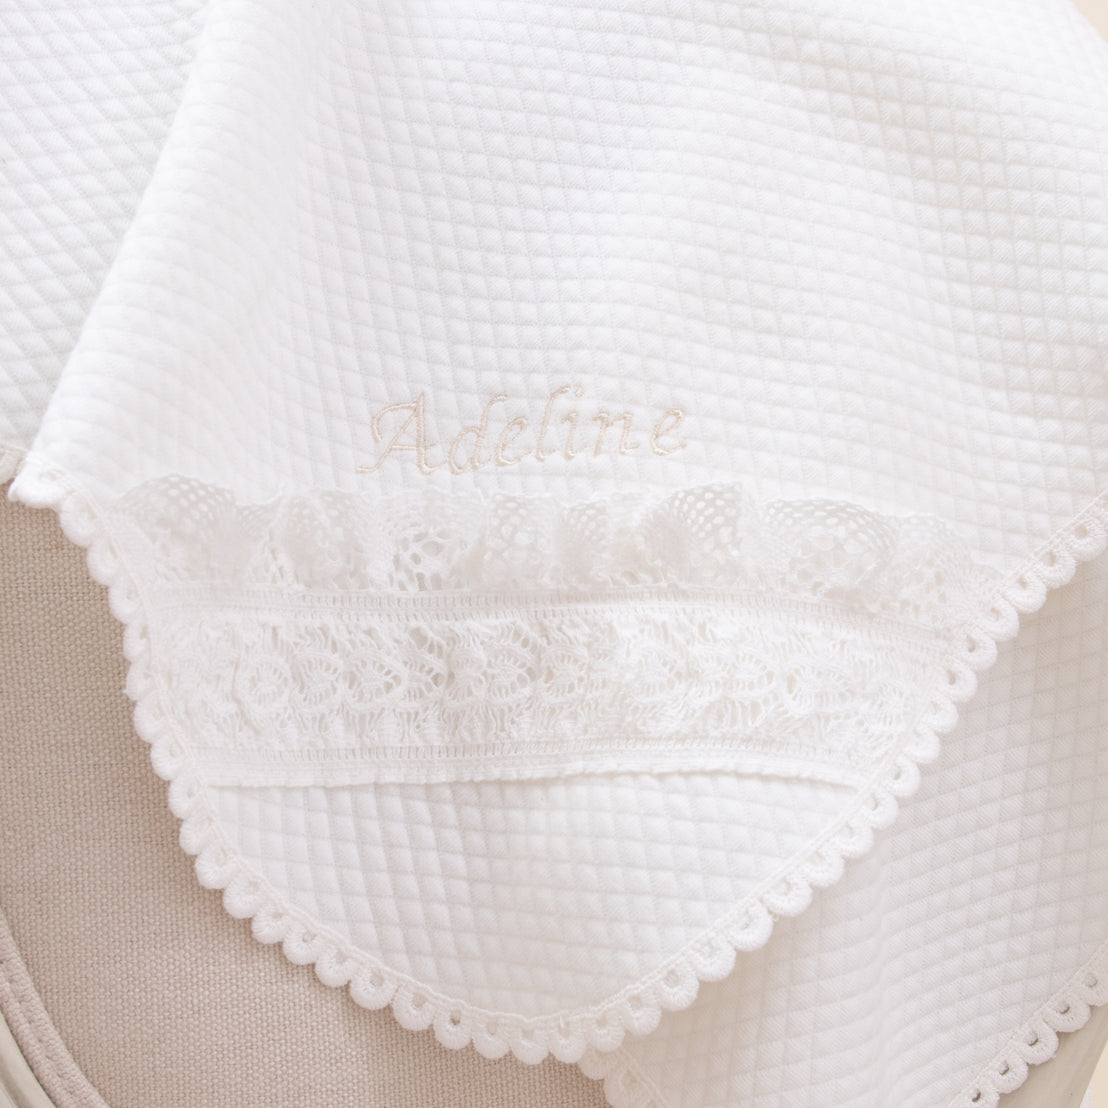 Alternate photo of the Adeline baptism blanket, with name personally embroidered in corner.